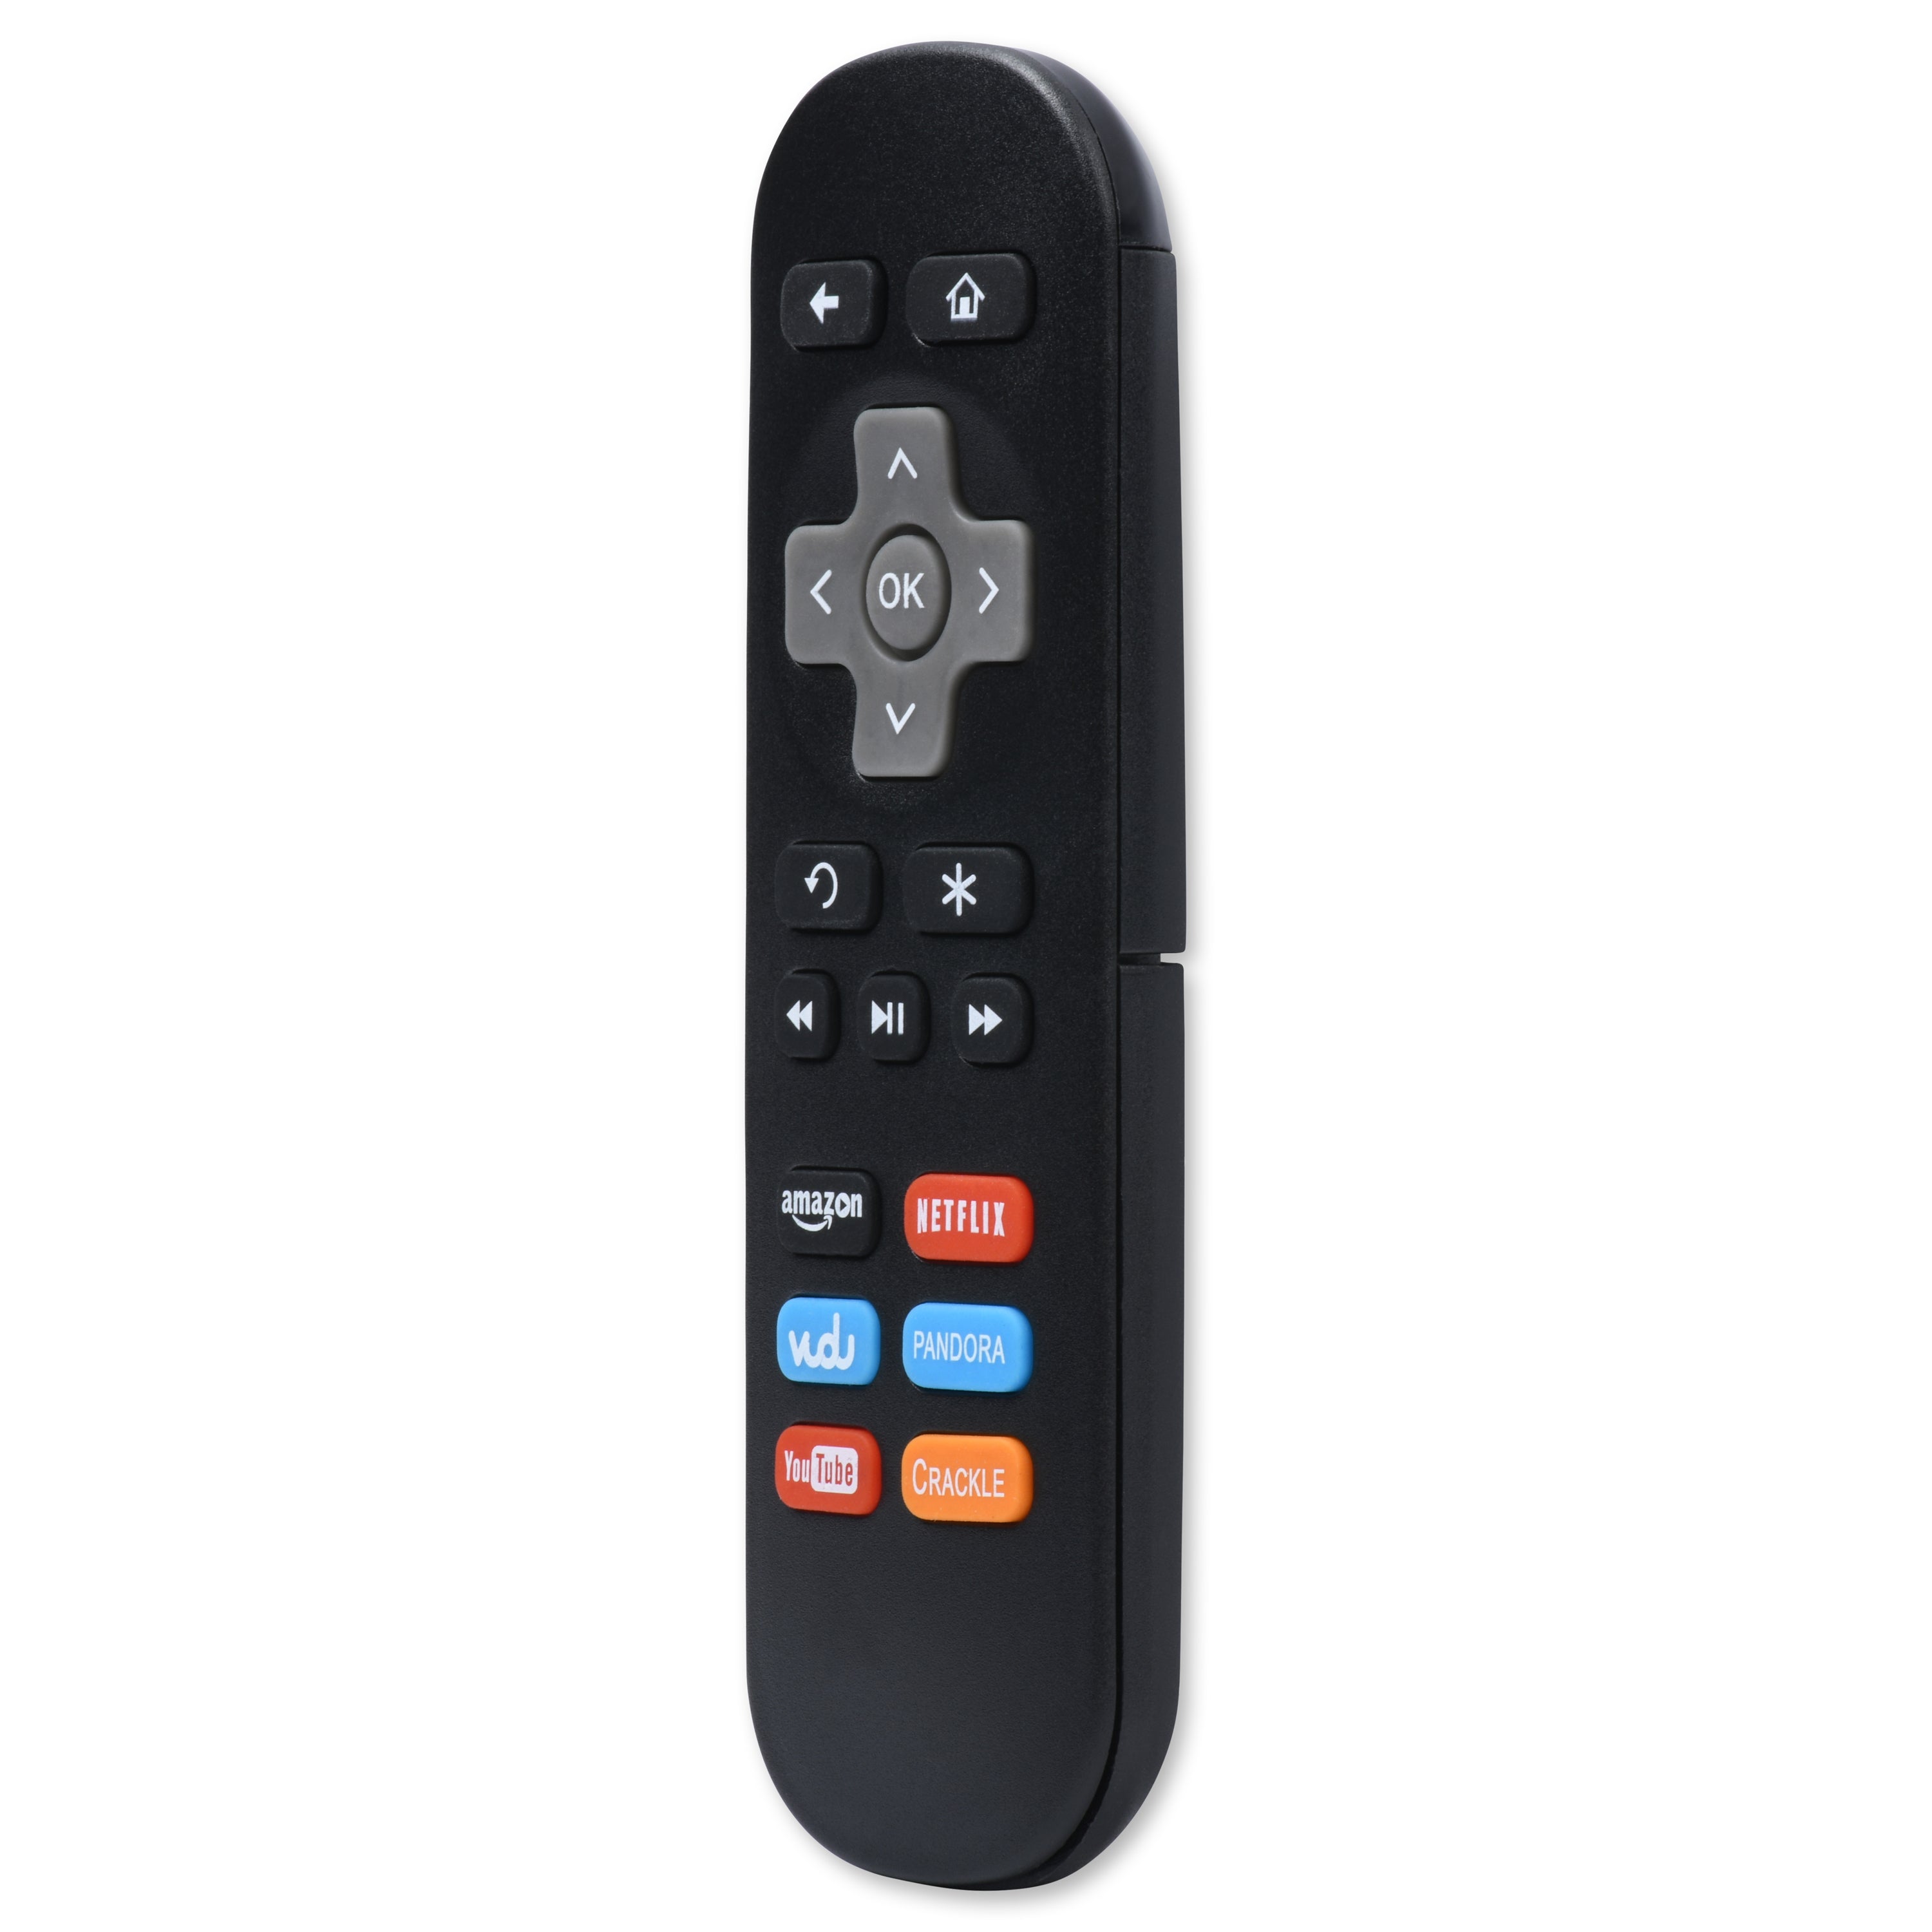 Newest technology Replacement Remote for ROKU 1/2/3/4 Express+/Premiere+/Ultra - Doug's Dojo